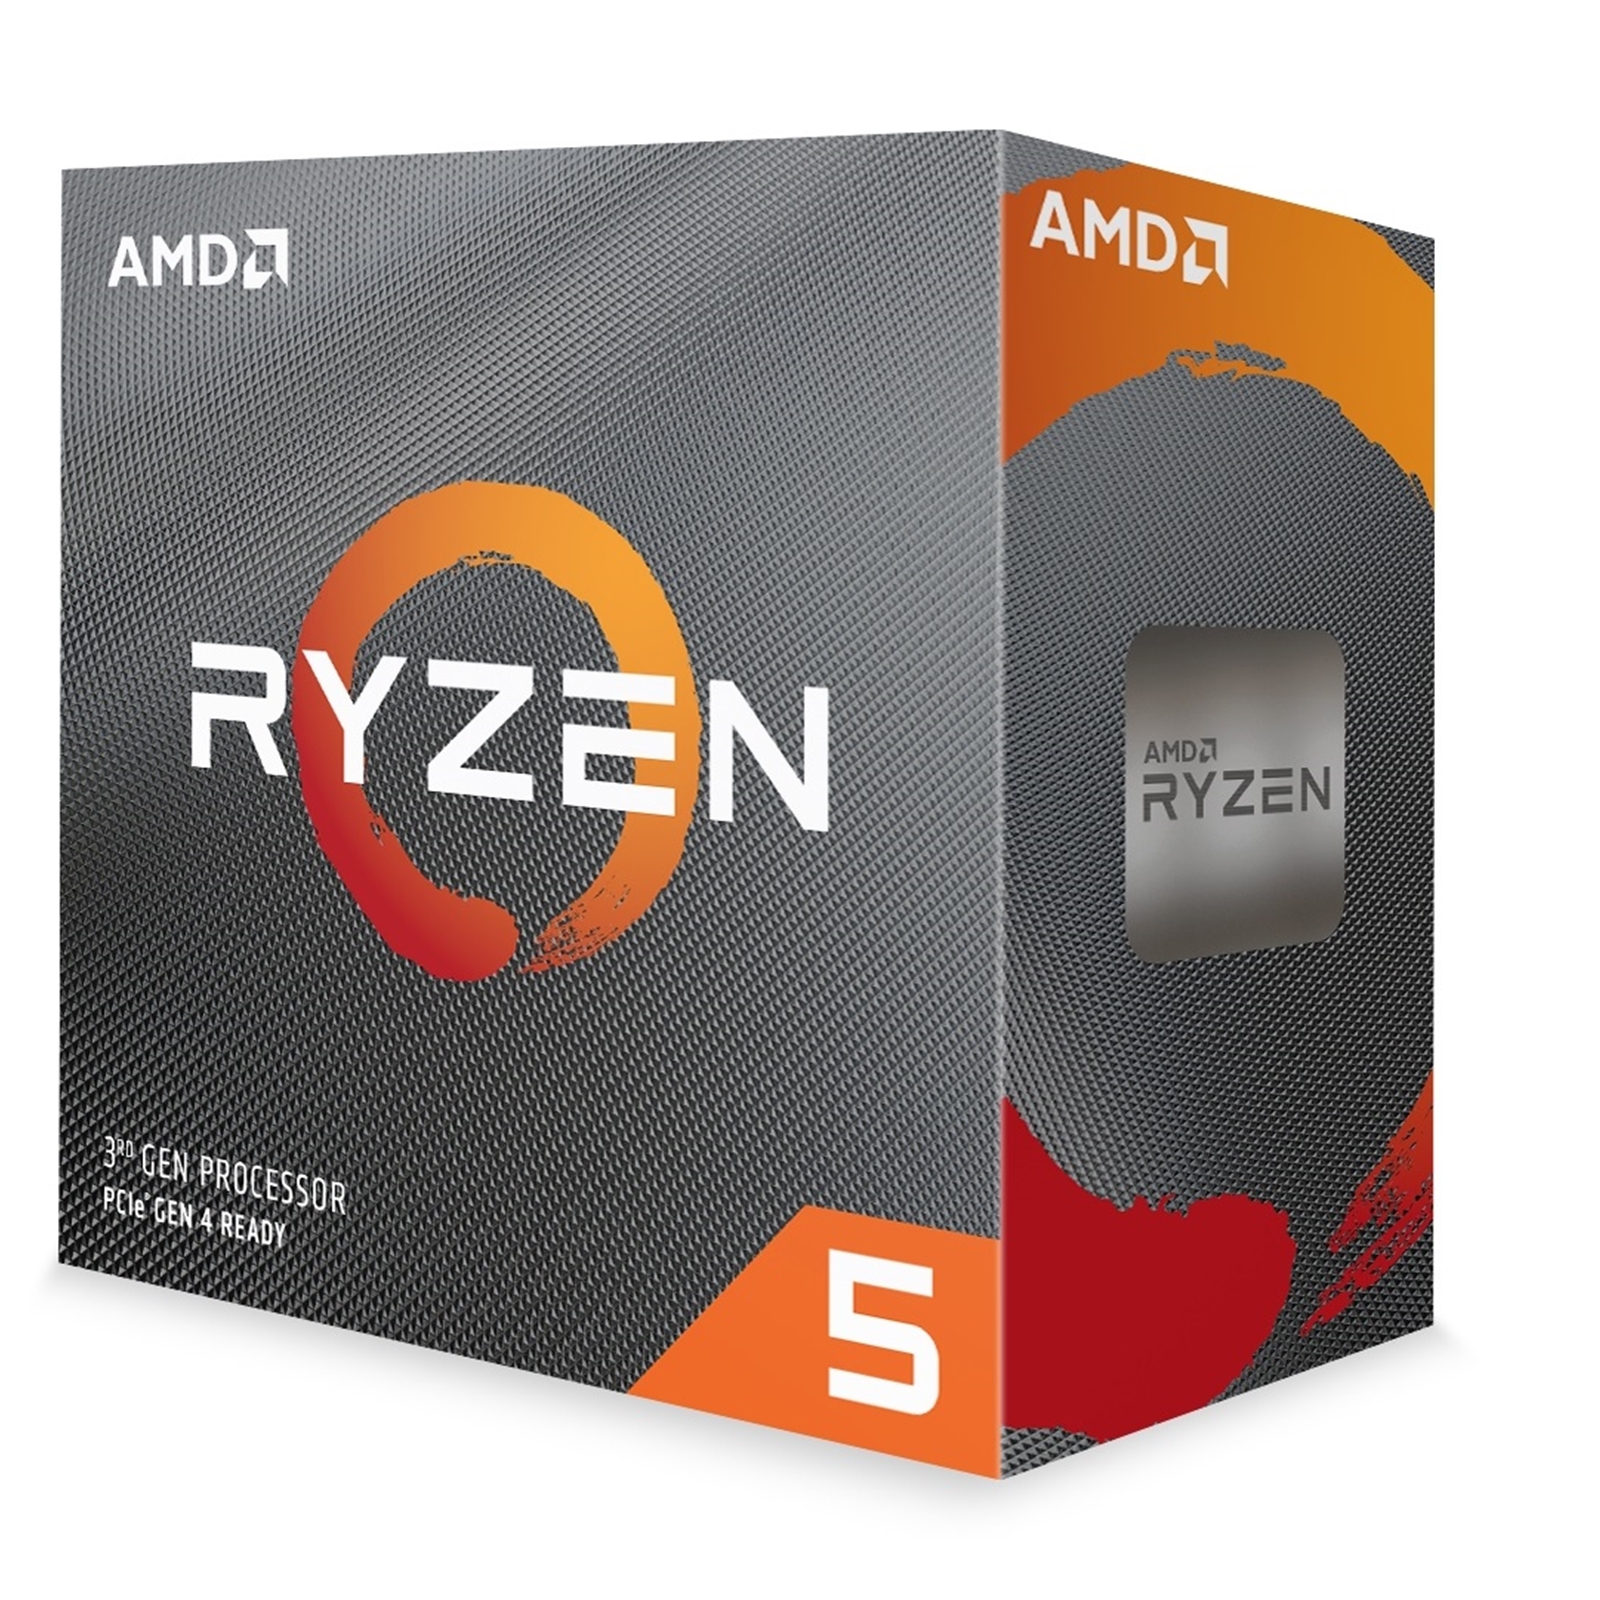 AMD Ryzen 5 3400G with Radeon Vega 11 Graphics and Wraith Stealth Cooler 3.7Ghz Quad Core AM4 Overclockable Processor